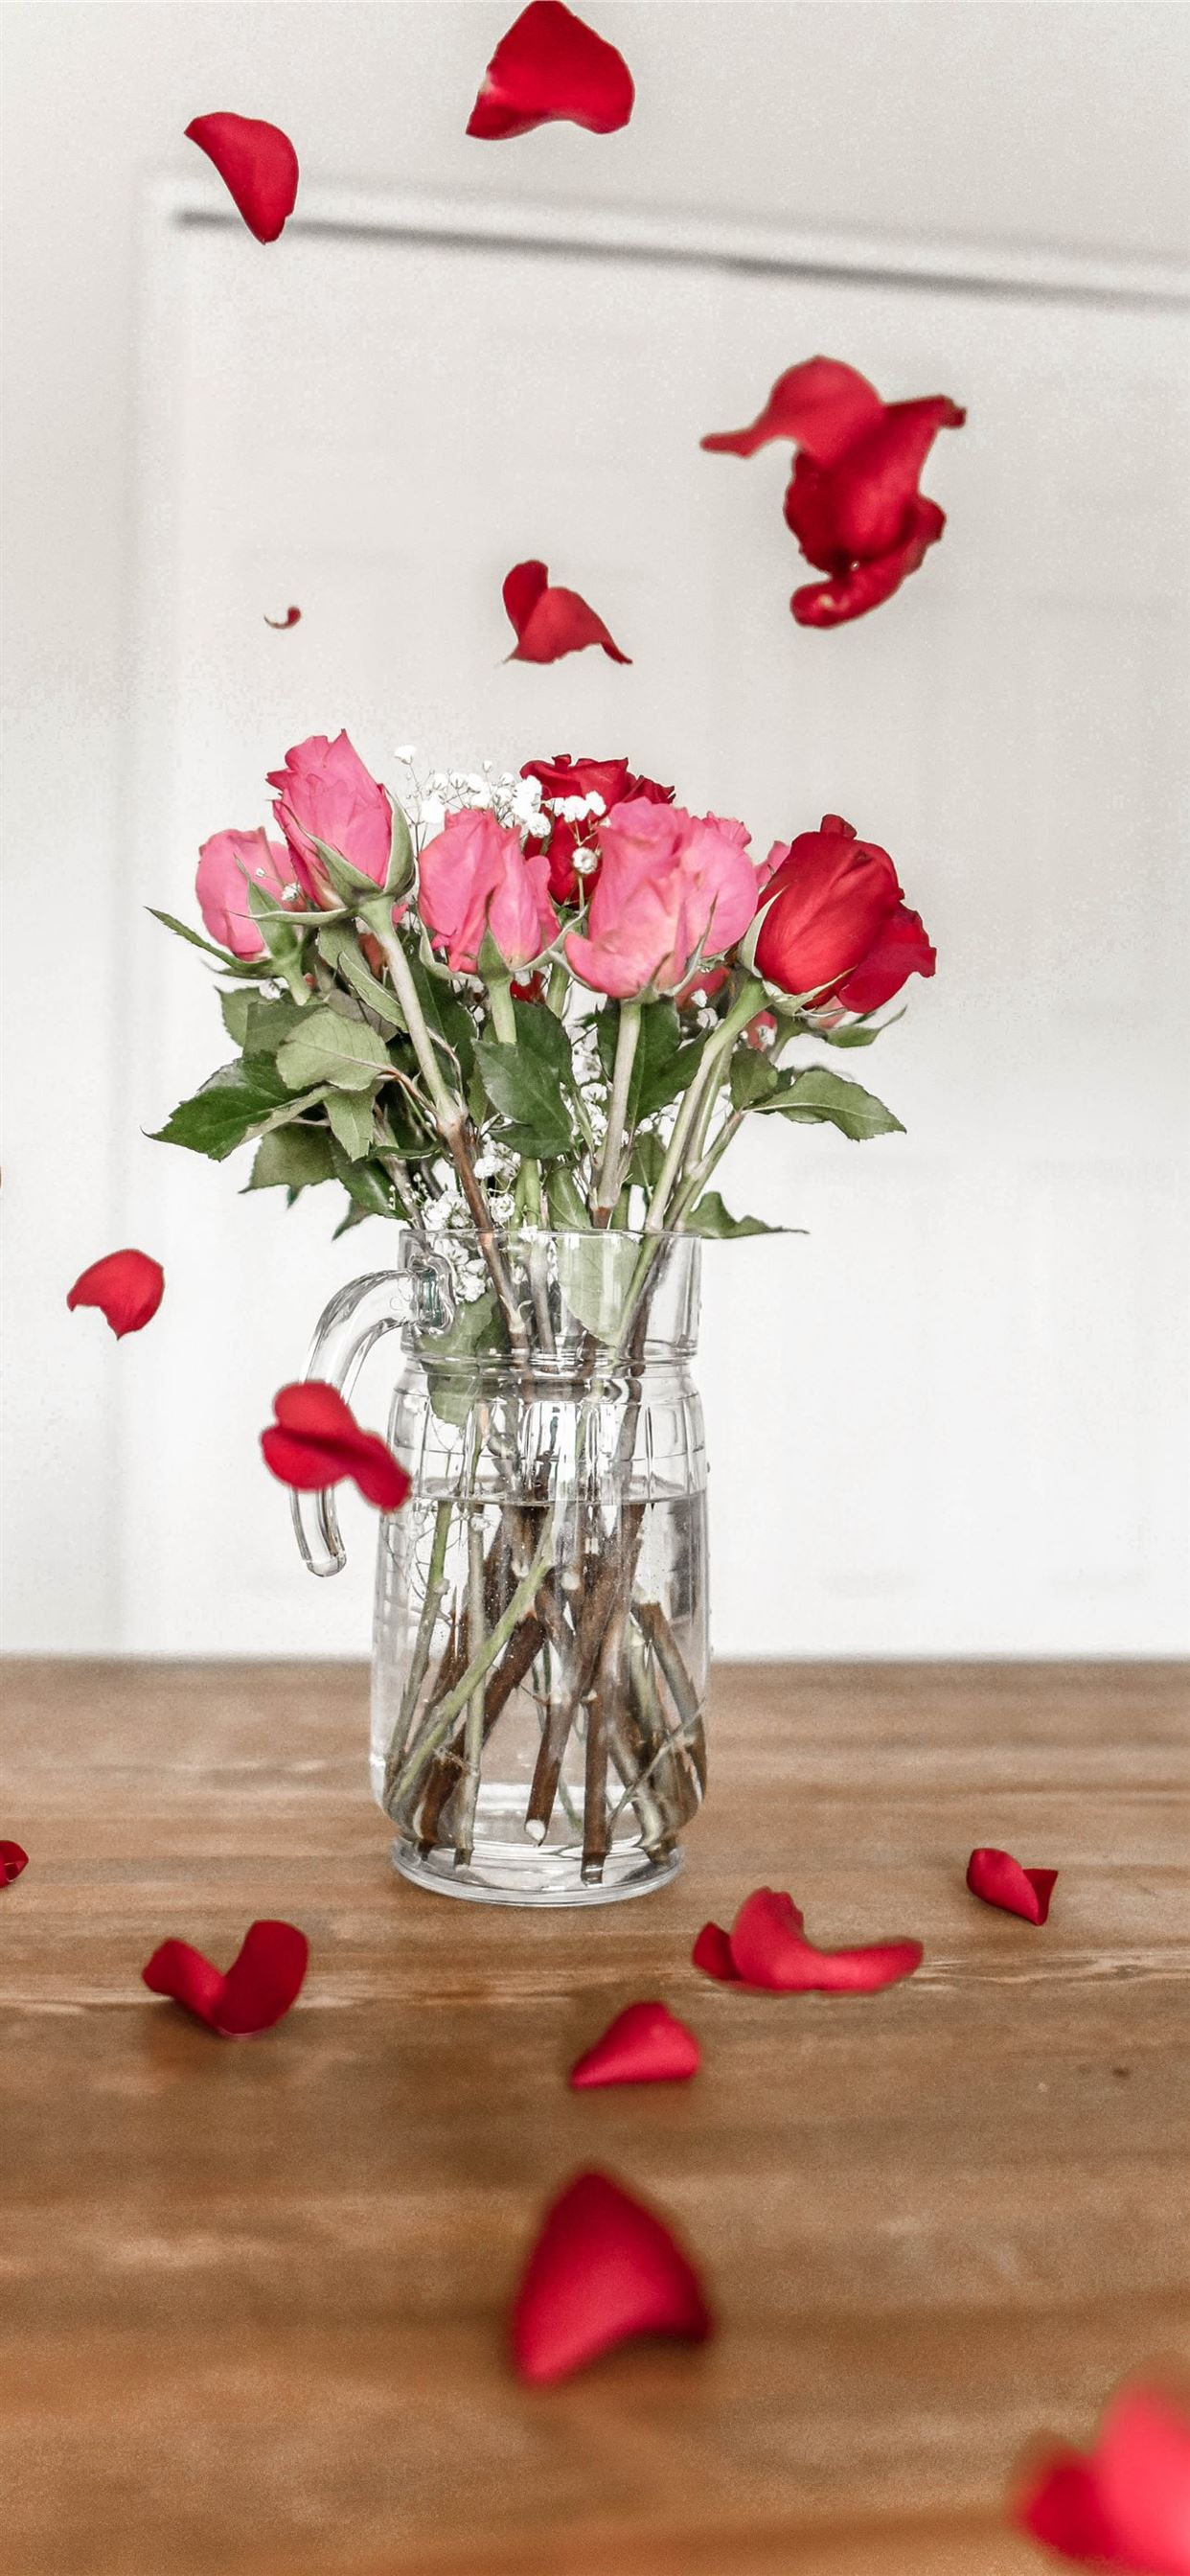 pink and red roses on clear glass vase iPhone 11 Wallpapers Free Download